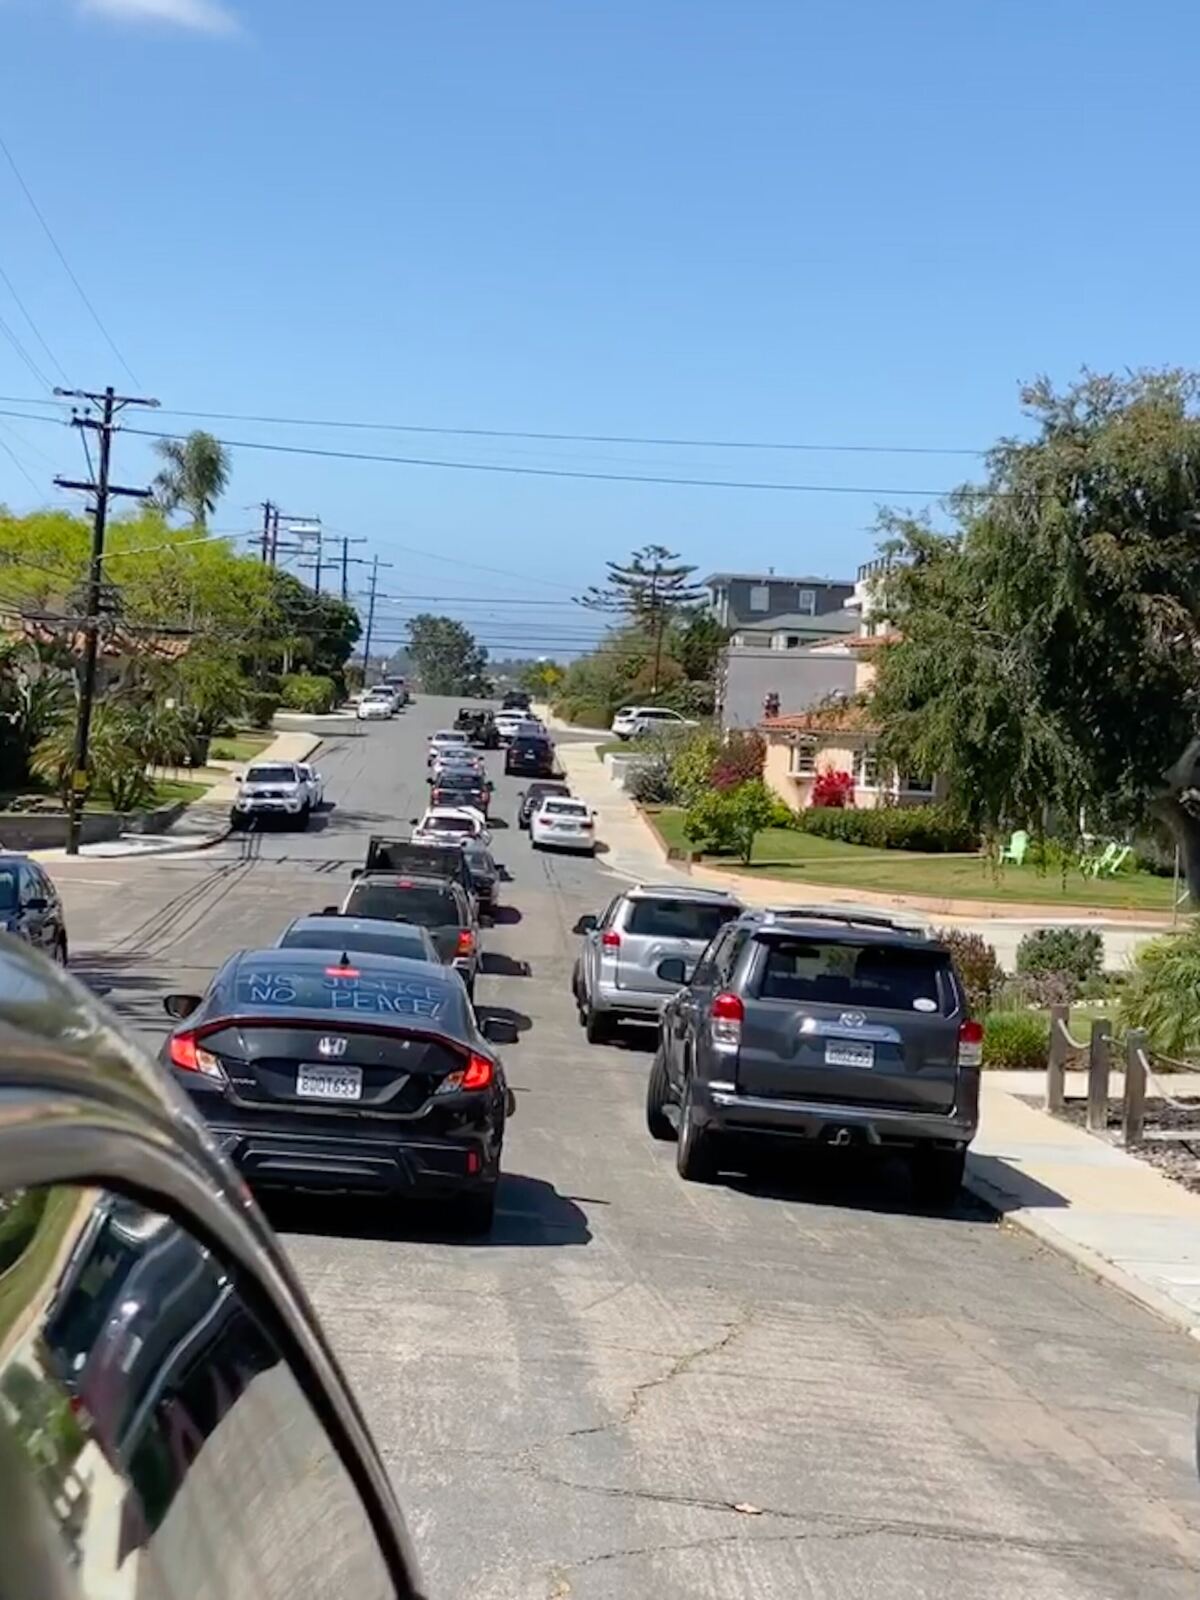 Advocates held an in-car rally in Point Loma on Friday to protest San Diego Mayor Kevin Faucloner's proposed budget for fiscal year 2021.